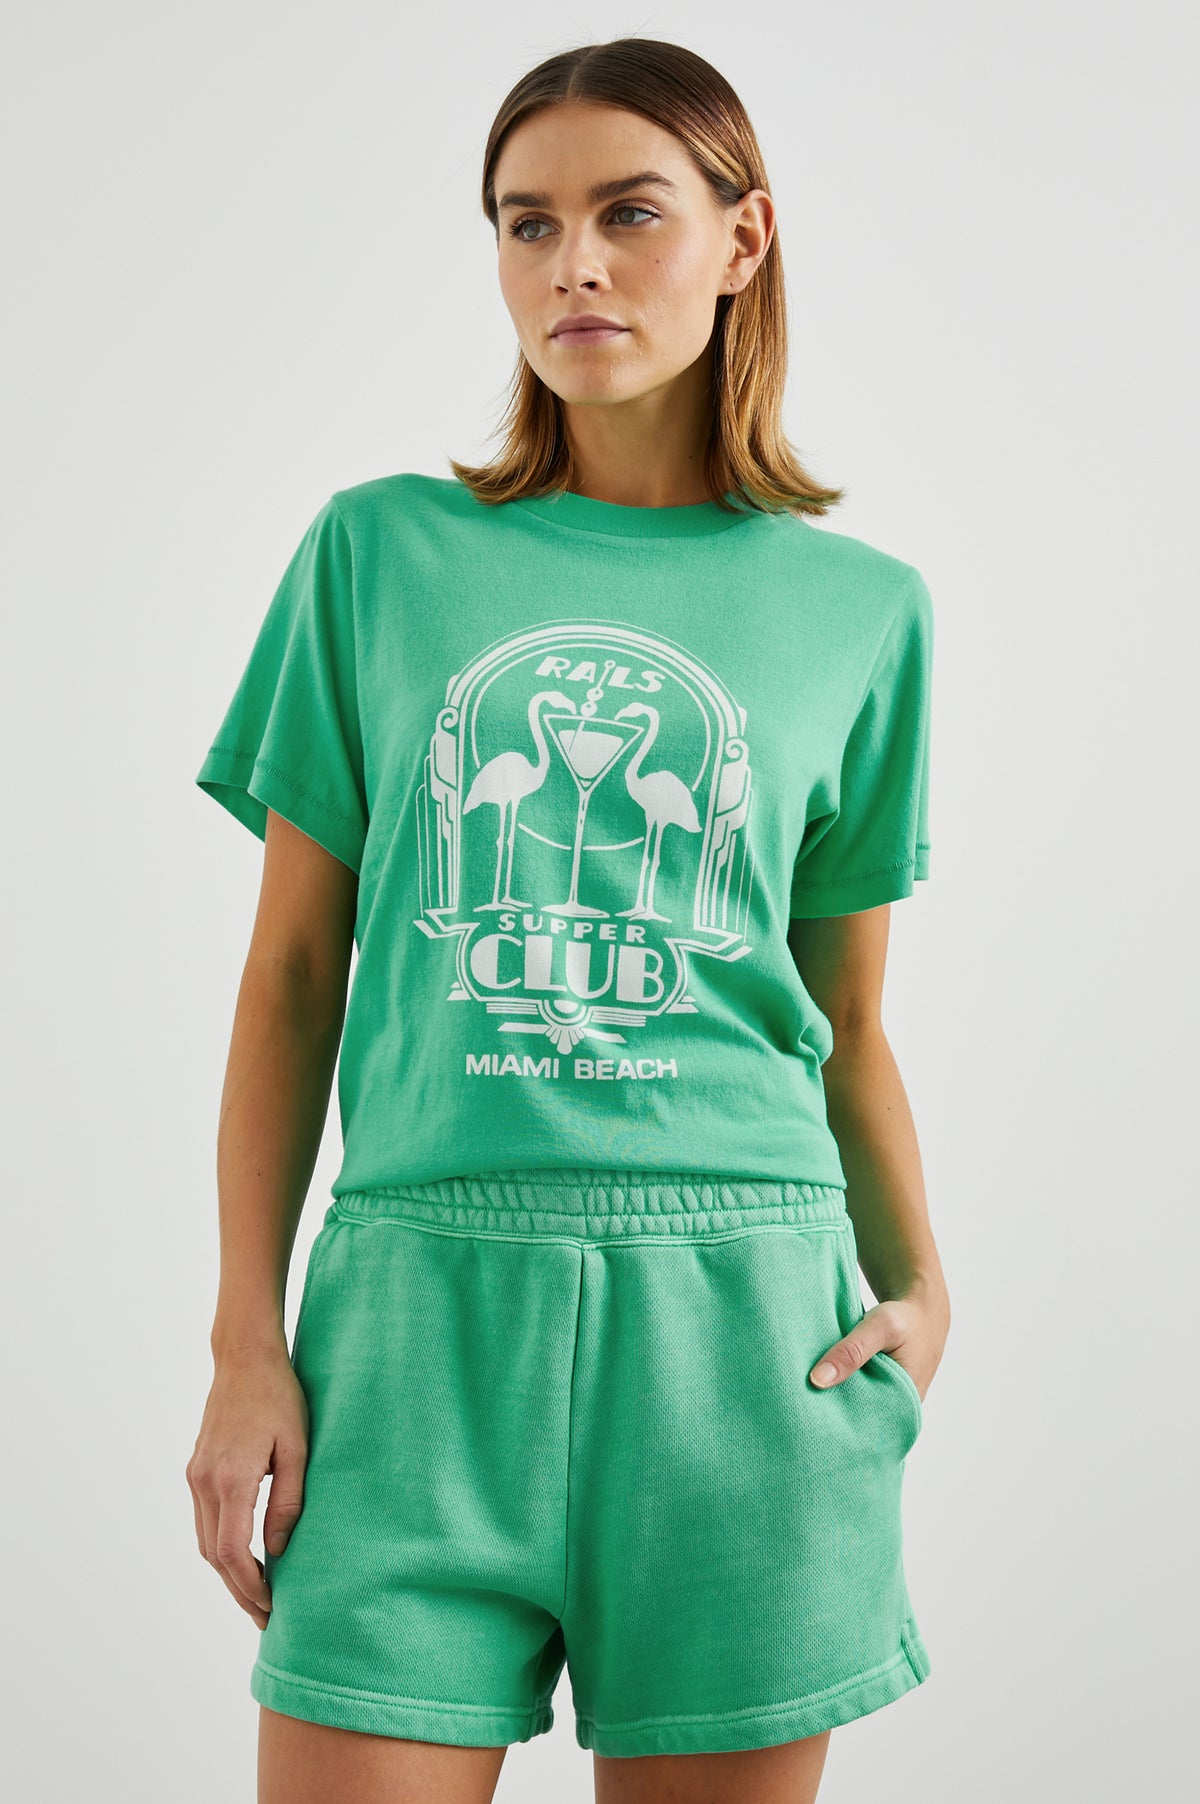 Boyfriend fit green tee with Flamingo design decal and short sleeves